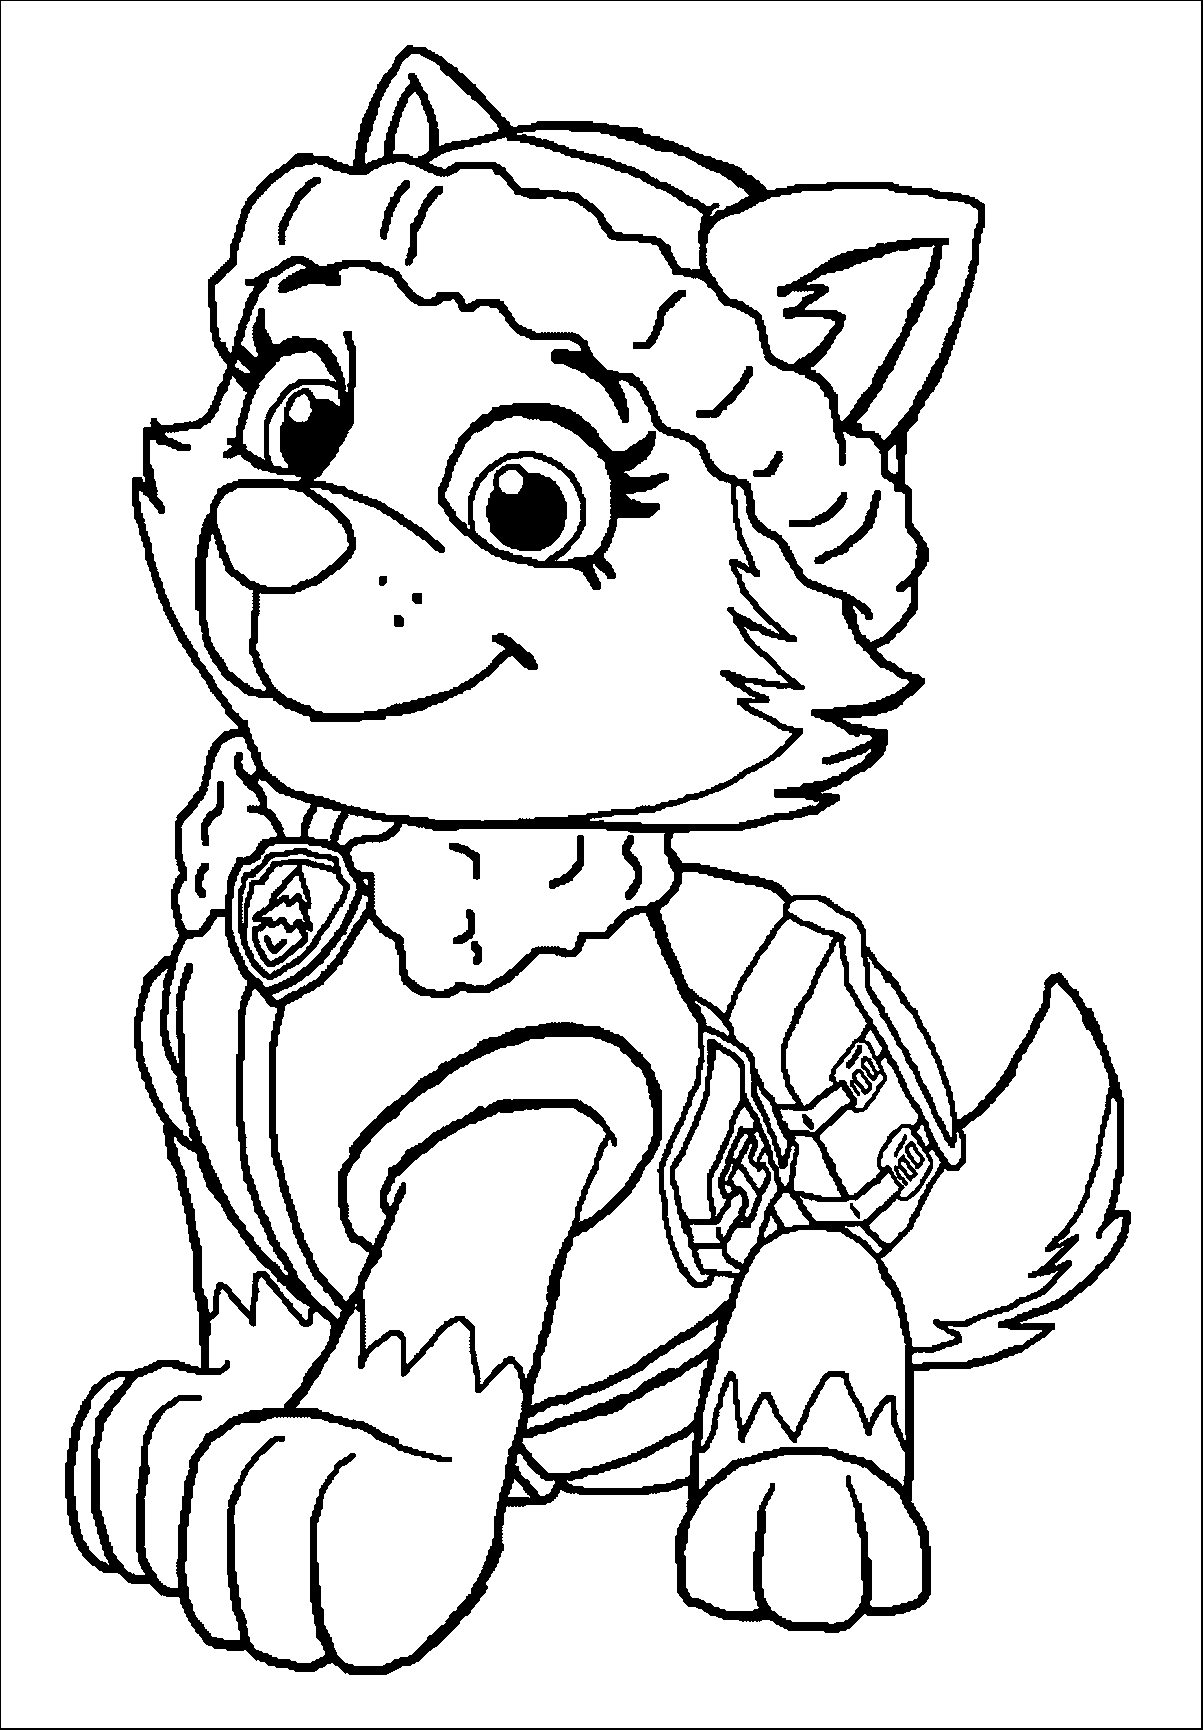 Animal Print Paw Patrol Coloring Pages for Kindergarten